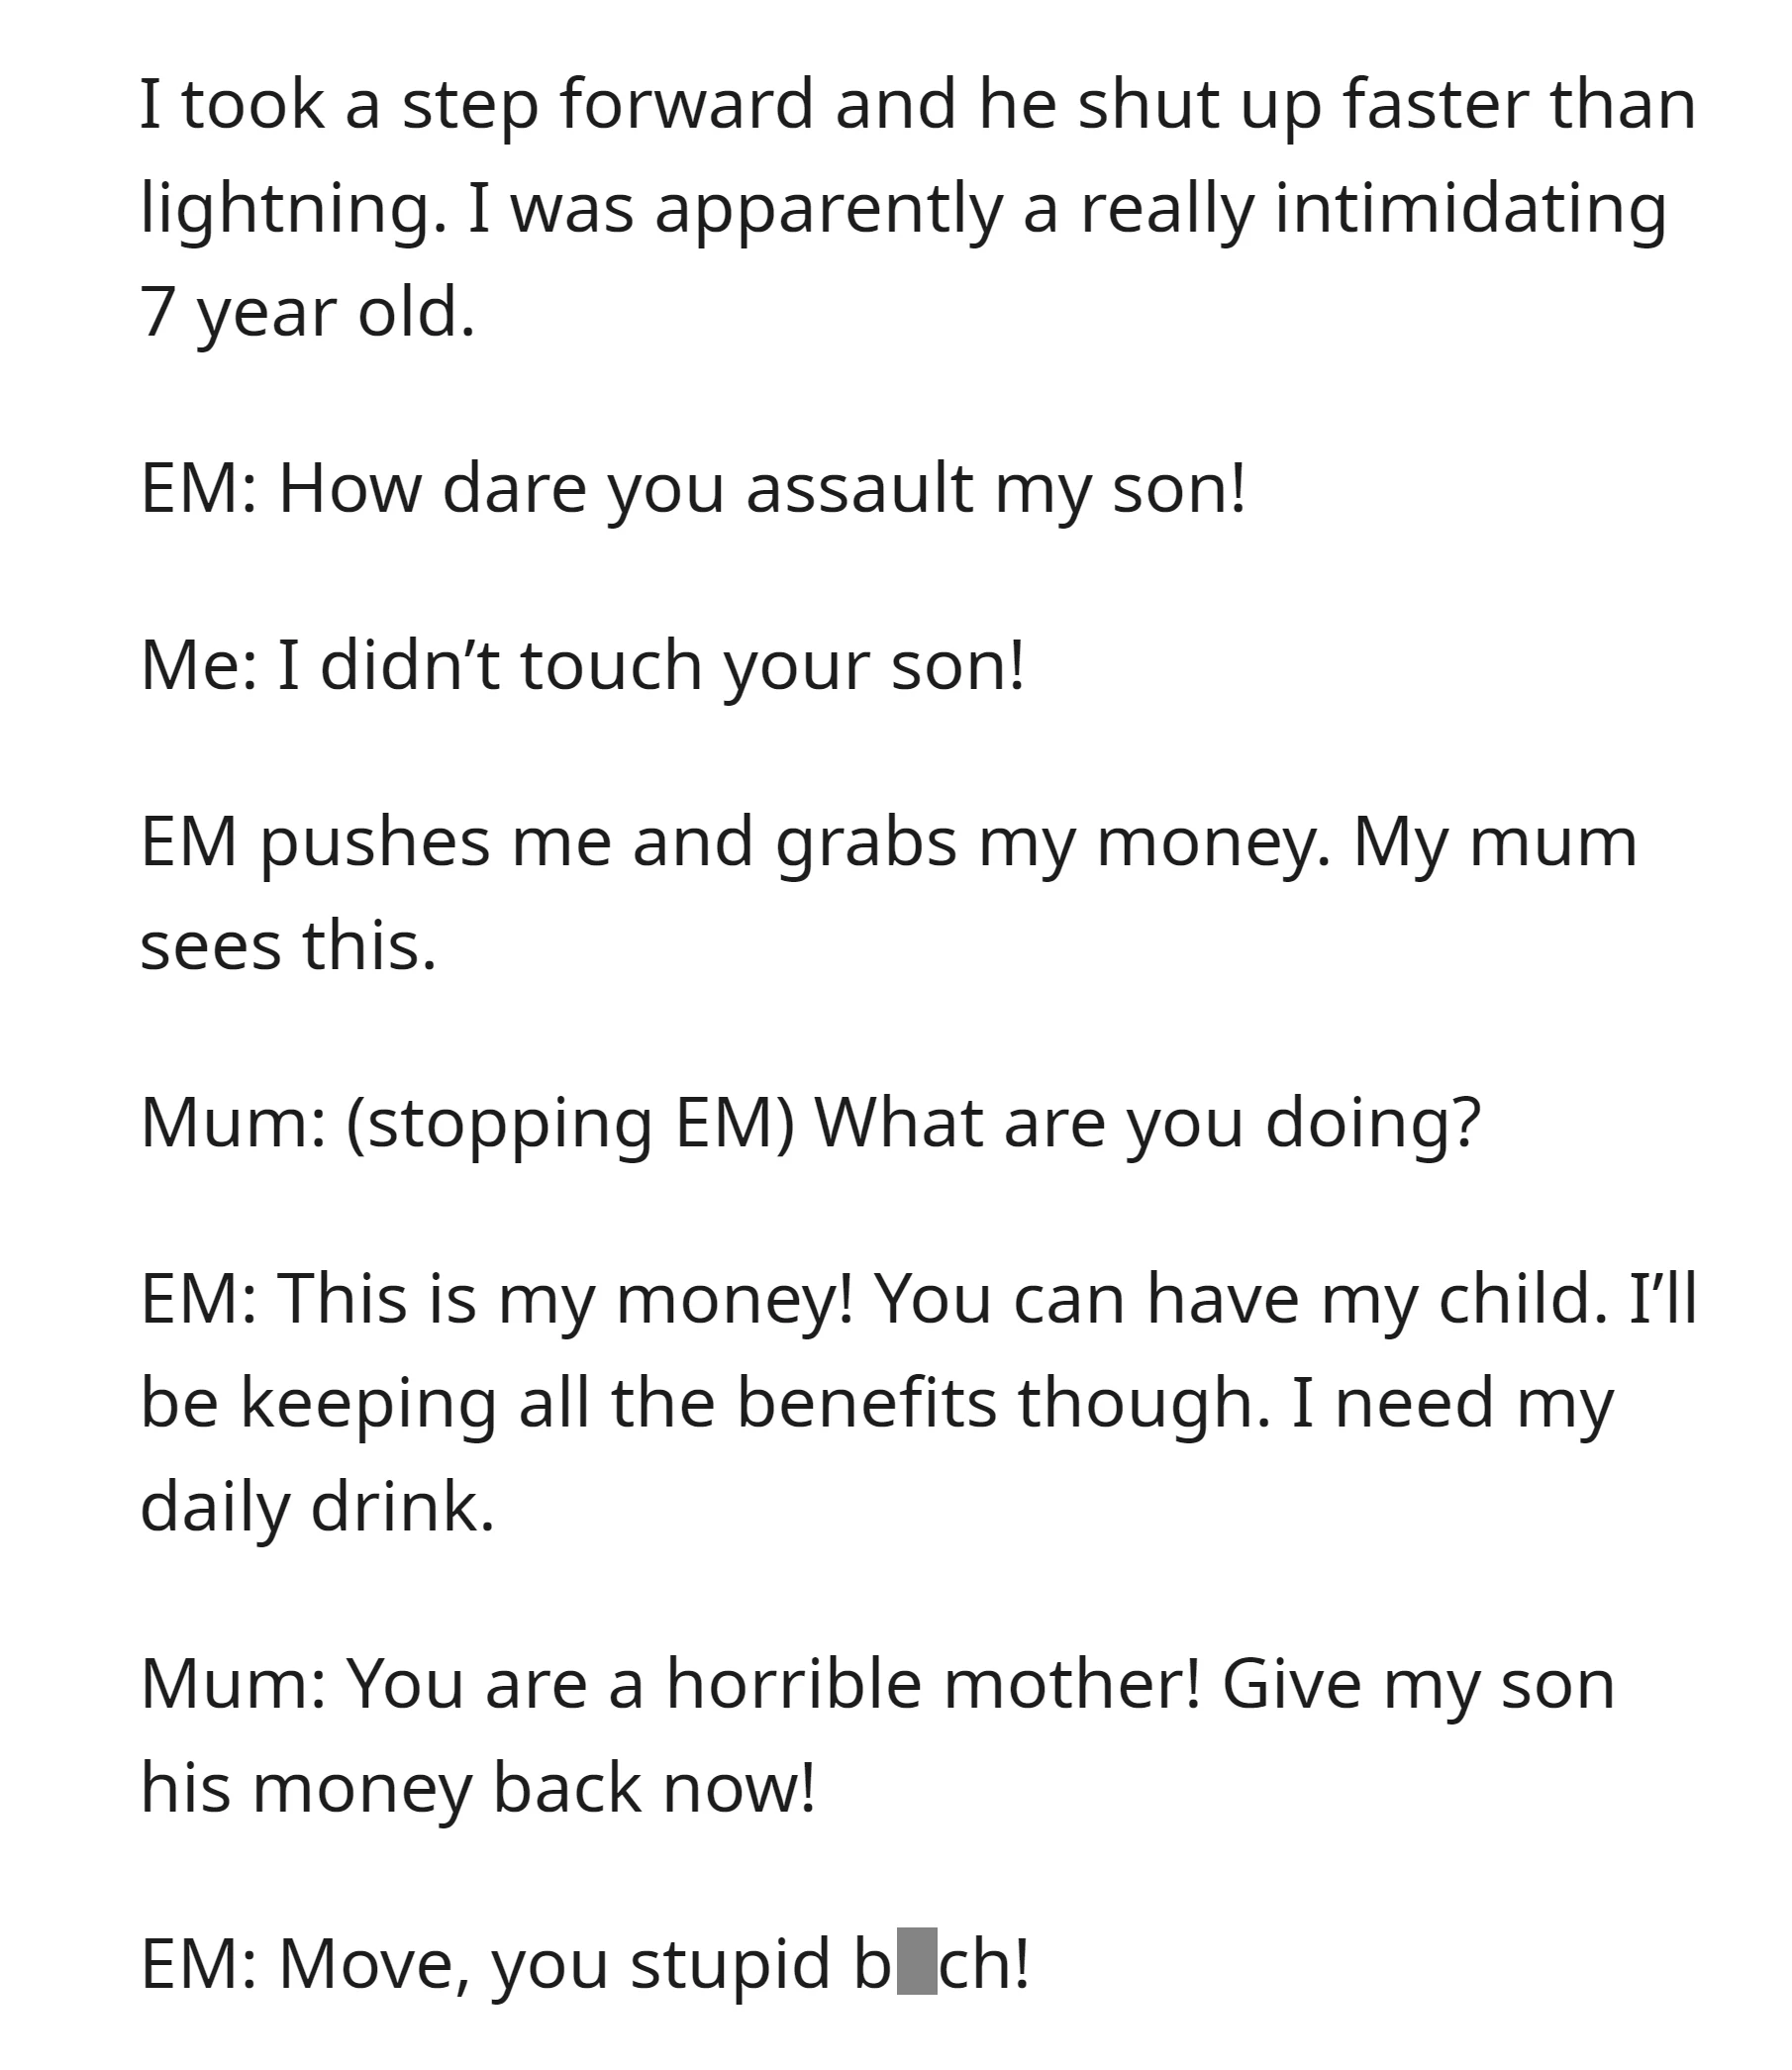 EM falsely accused the OP of assaulting her son, forcibly took the money